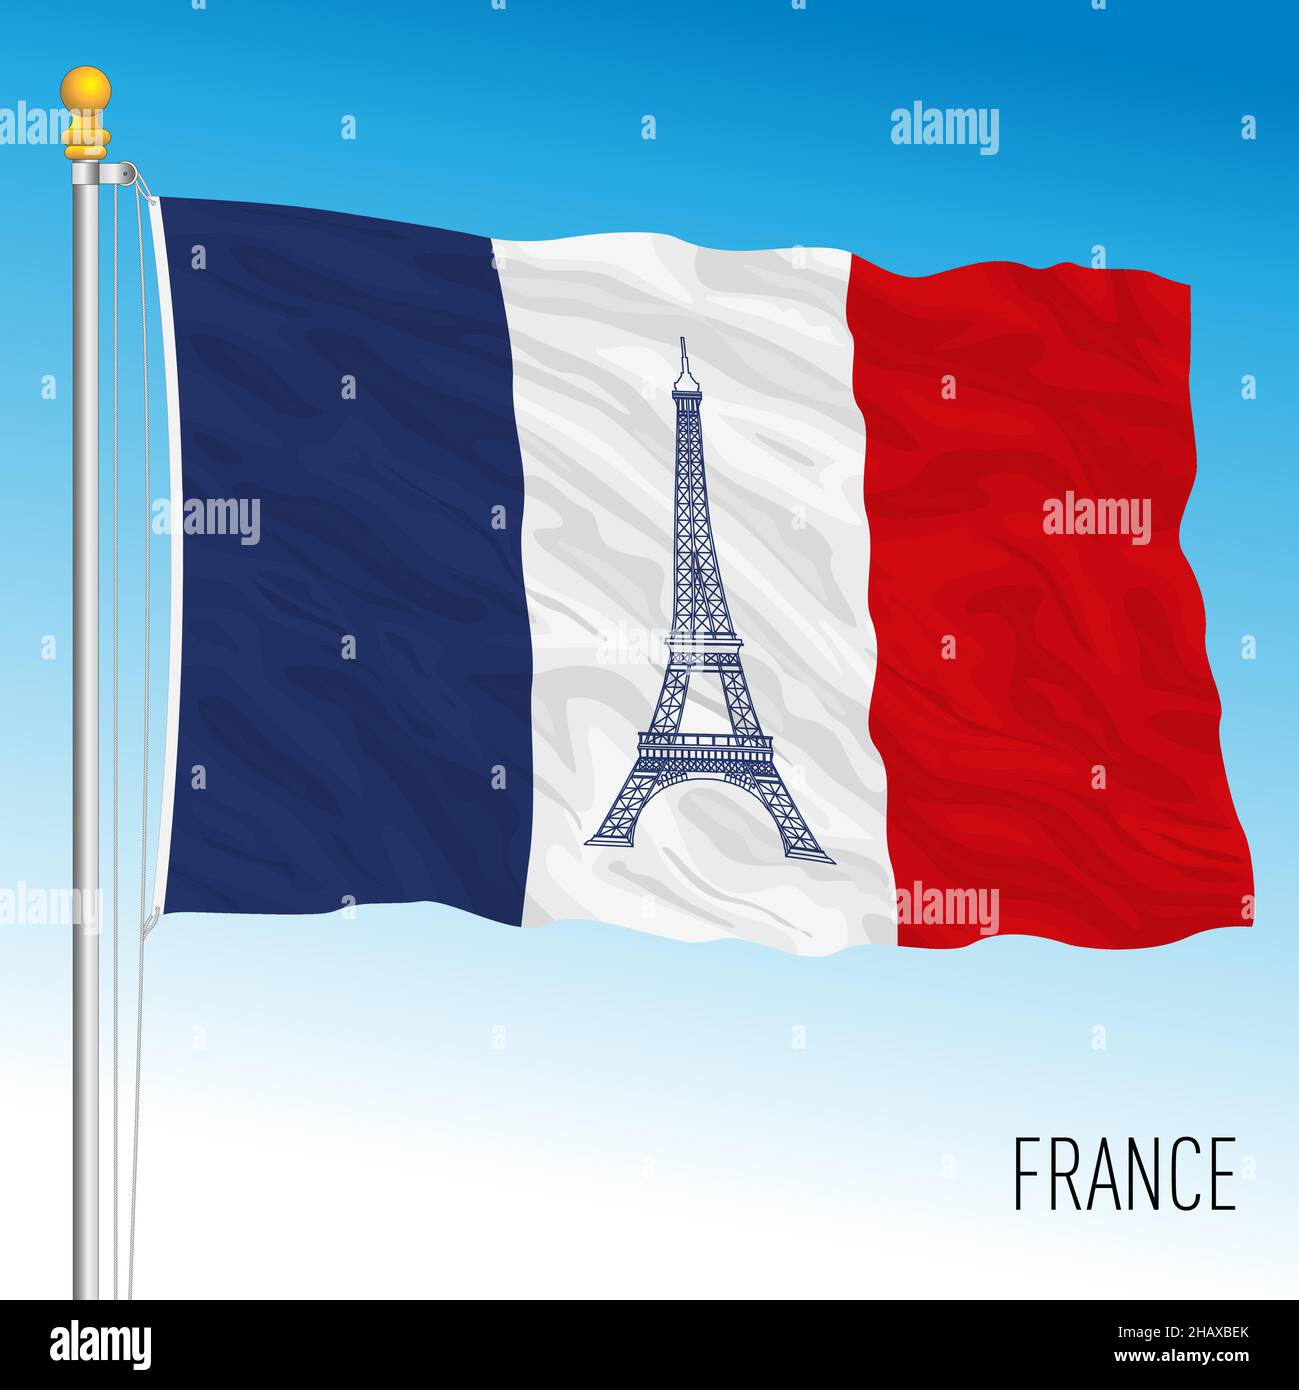 Fancy France flag with Eiffel tower symbol in the center, vector illustration Stock Vector